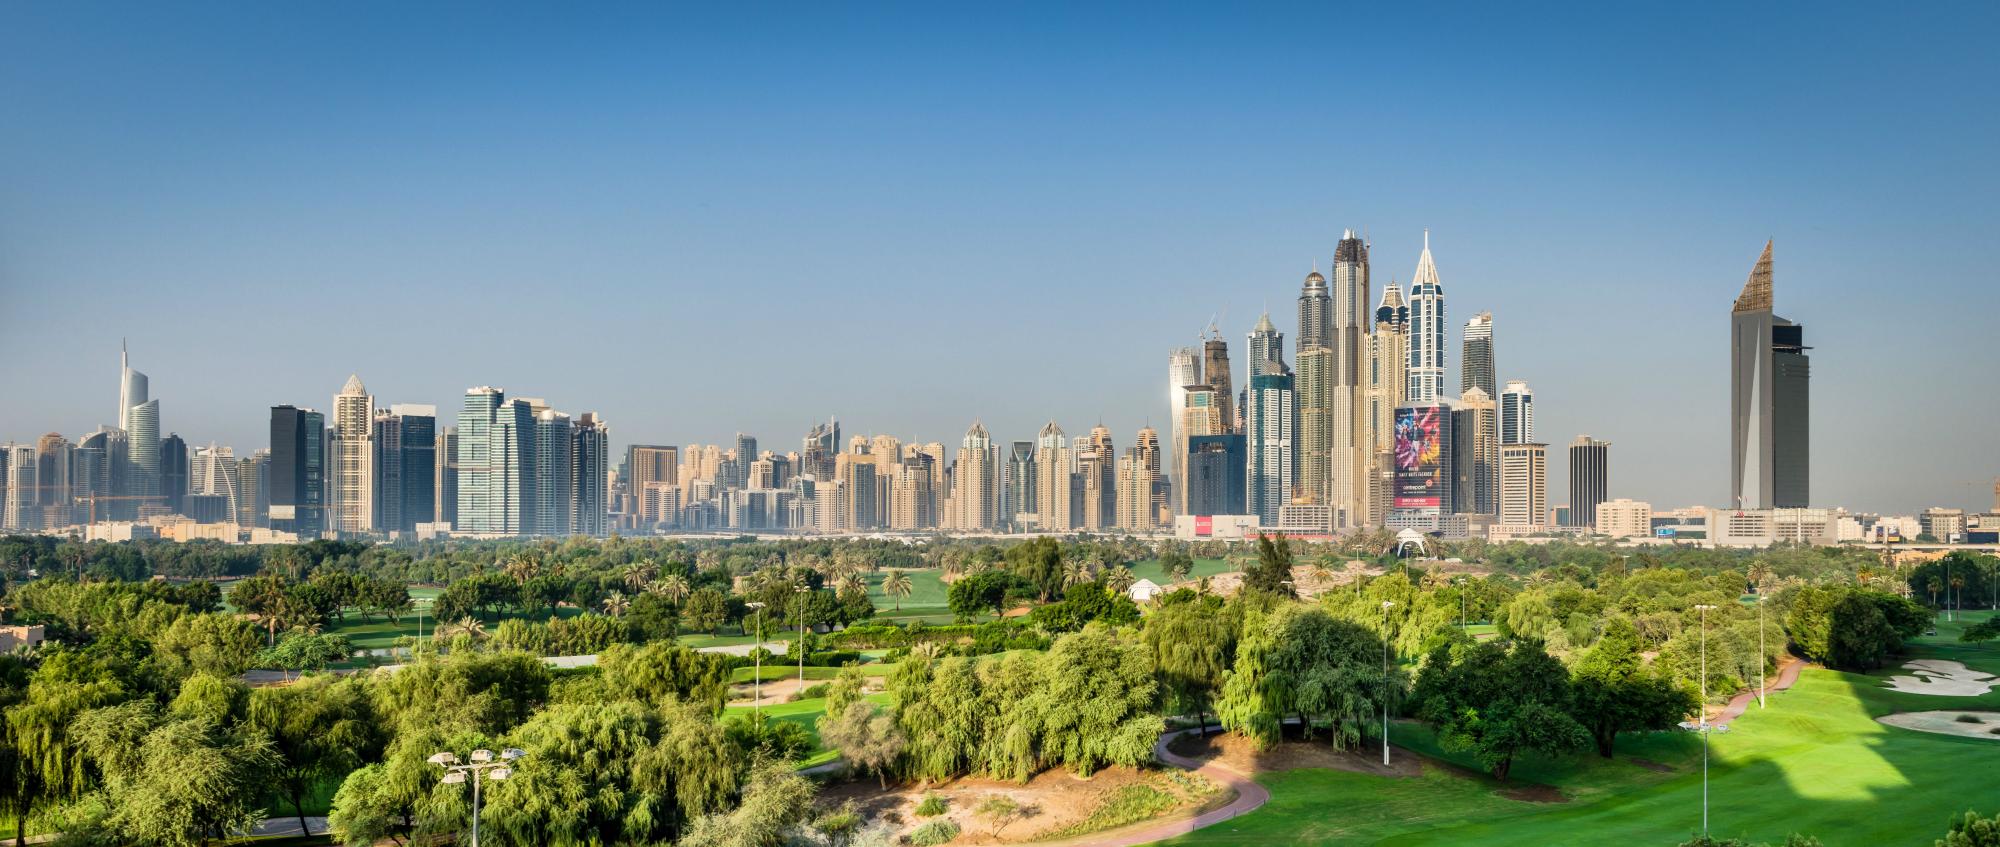 All The Emirates Golf Club's beautiful golf course within staggering Dubai.